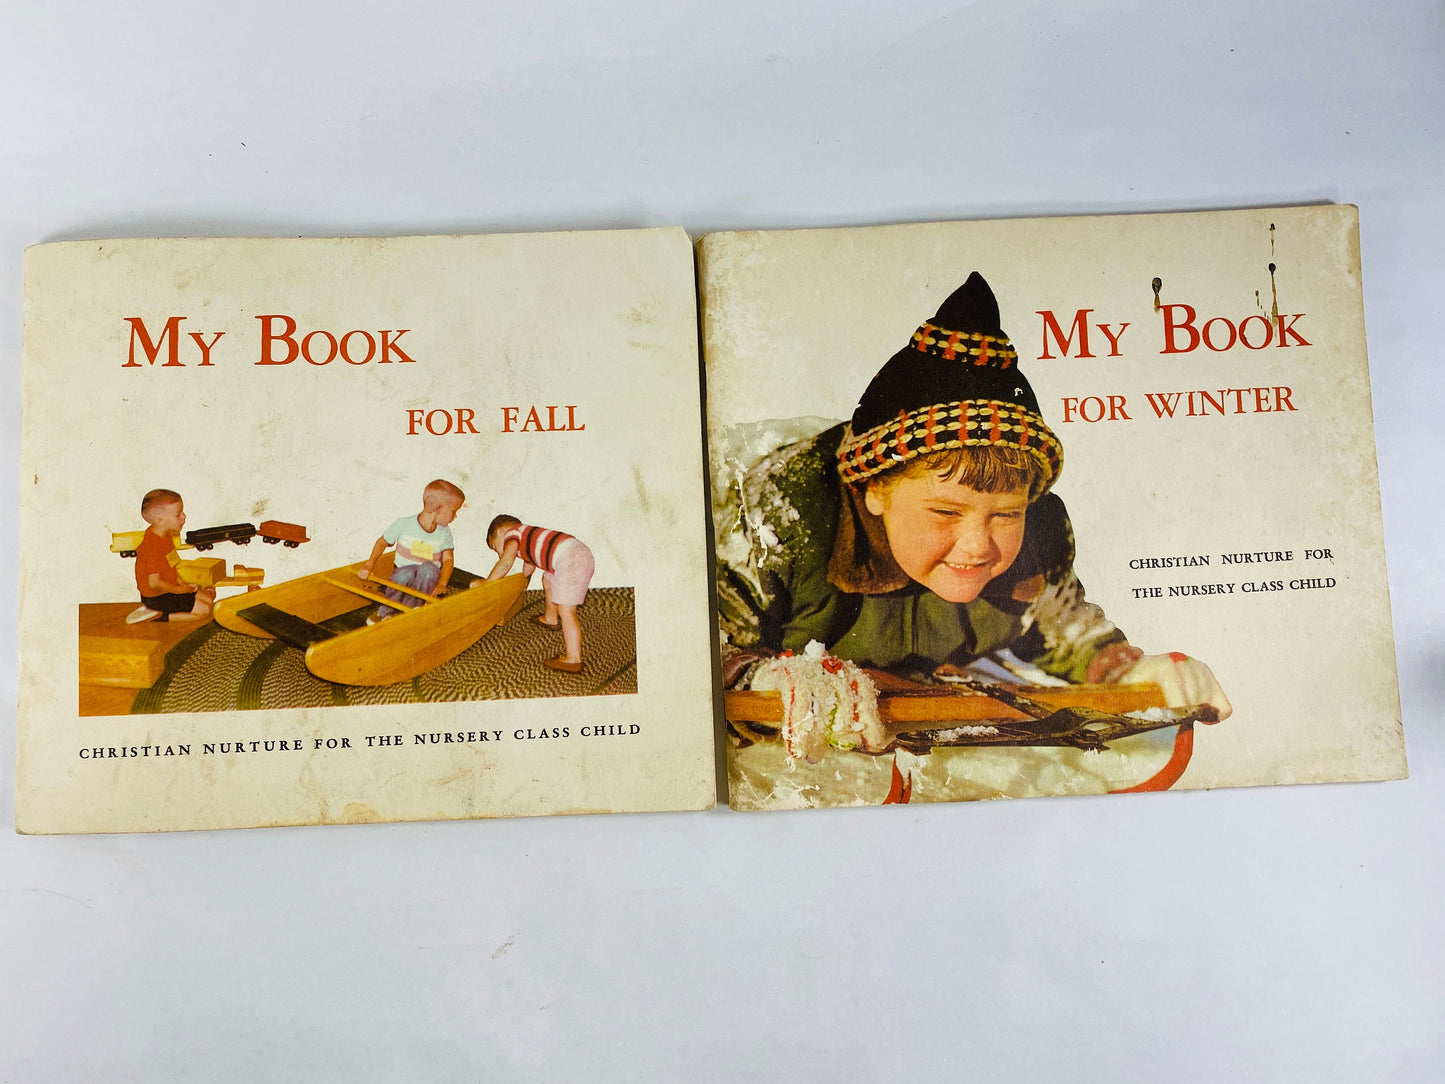 1959 Sunday School book lot My Book for Fall & Winter by Maggie May Burrrow and Mary Edna Lloyd. Vintage book decor. For ages 3 and up.